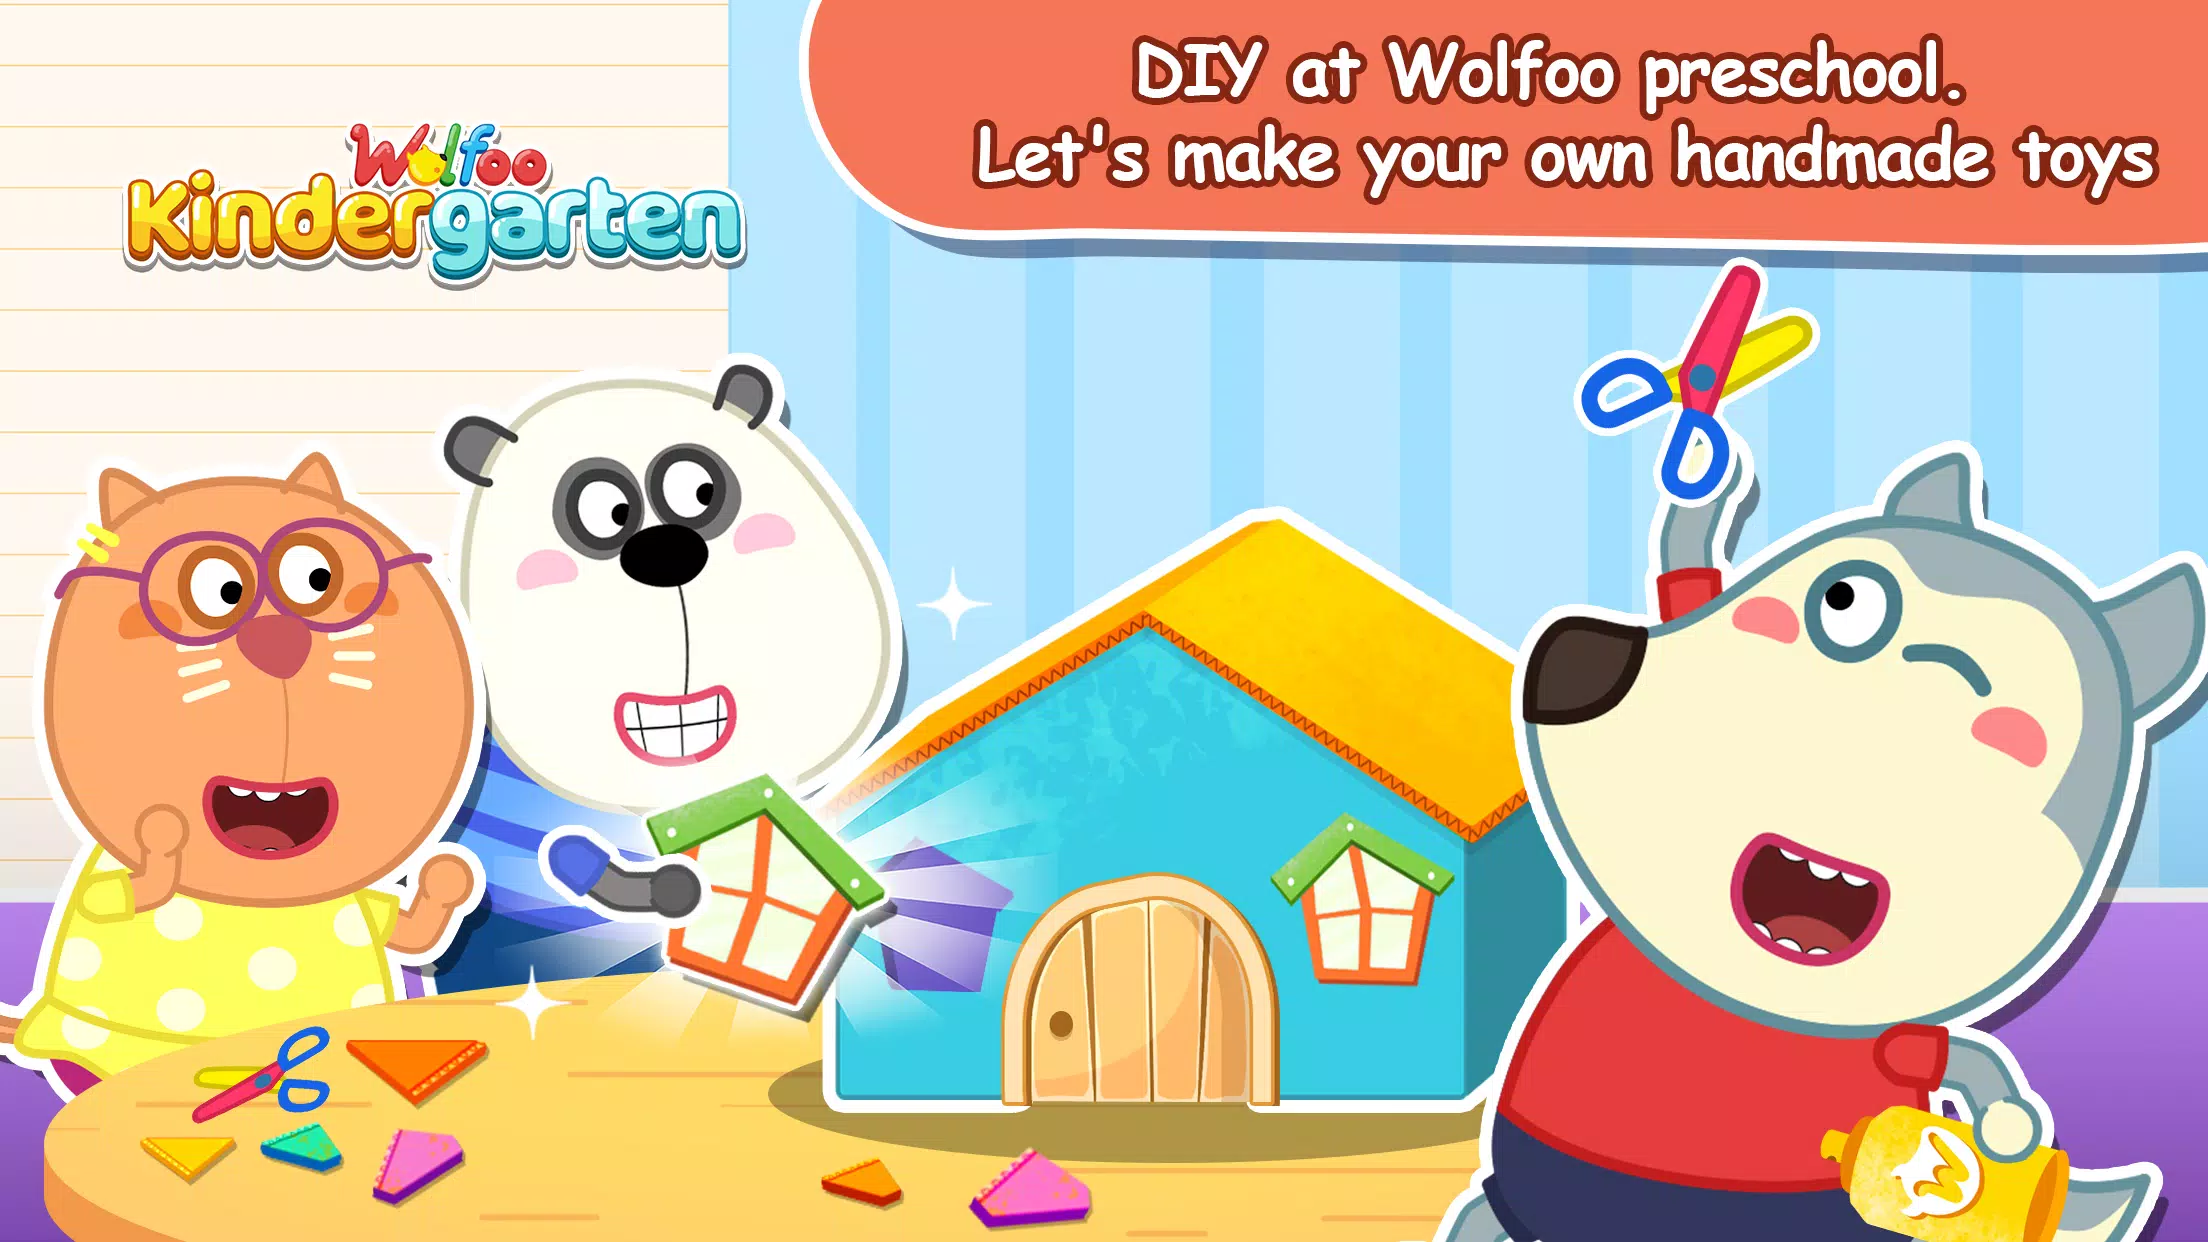 Wolfoo Family Picnic Adventure android iOS apk download for free